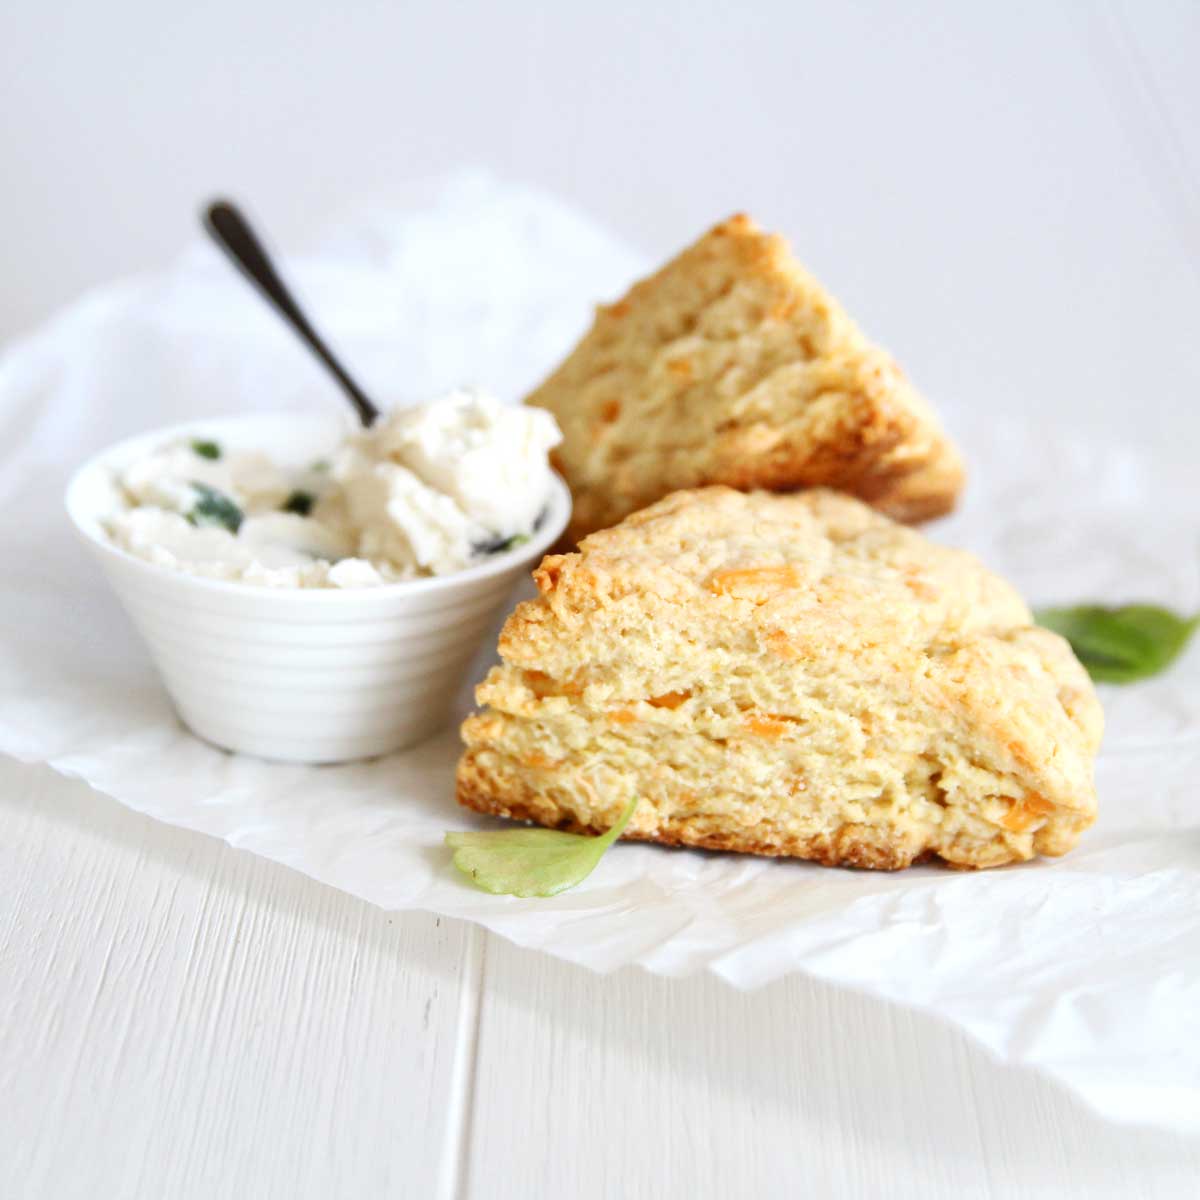 The Best Ever Vegan "Cheddar Cheese" Scones - Vegan Cheddar Cheese Scones